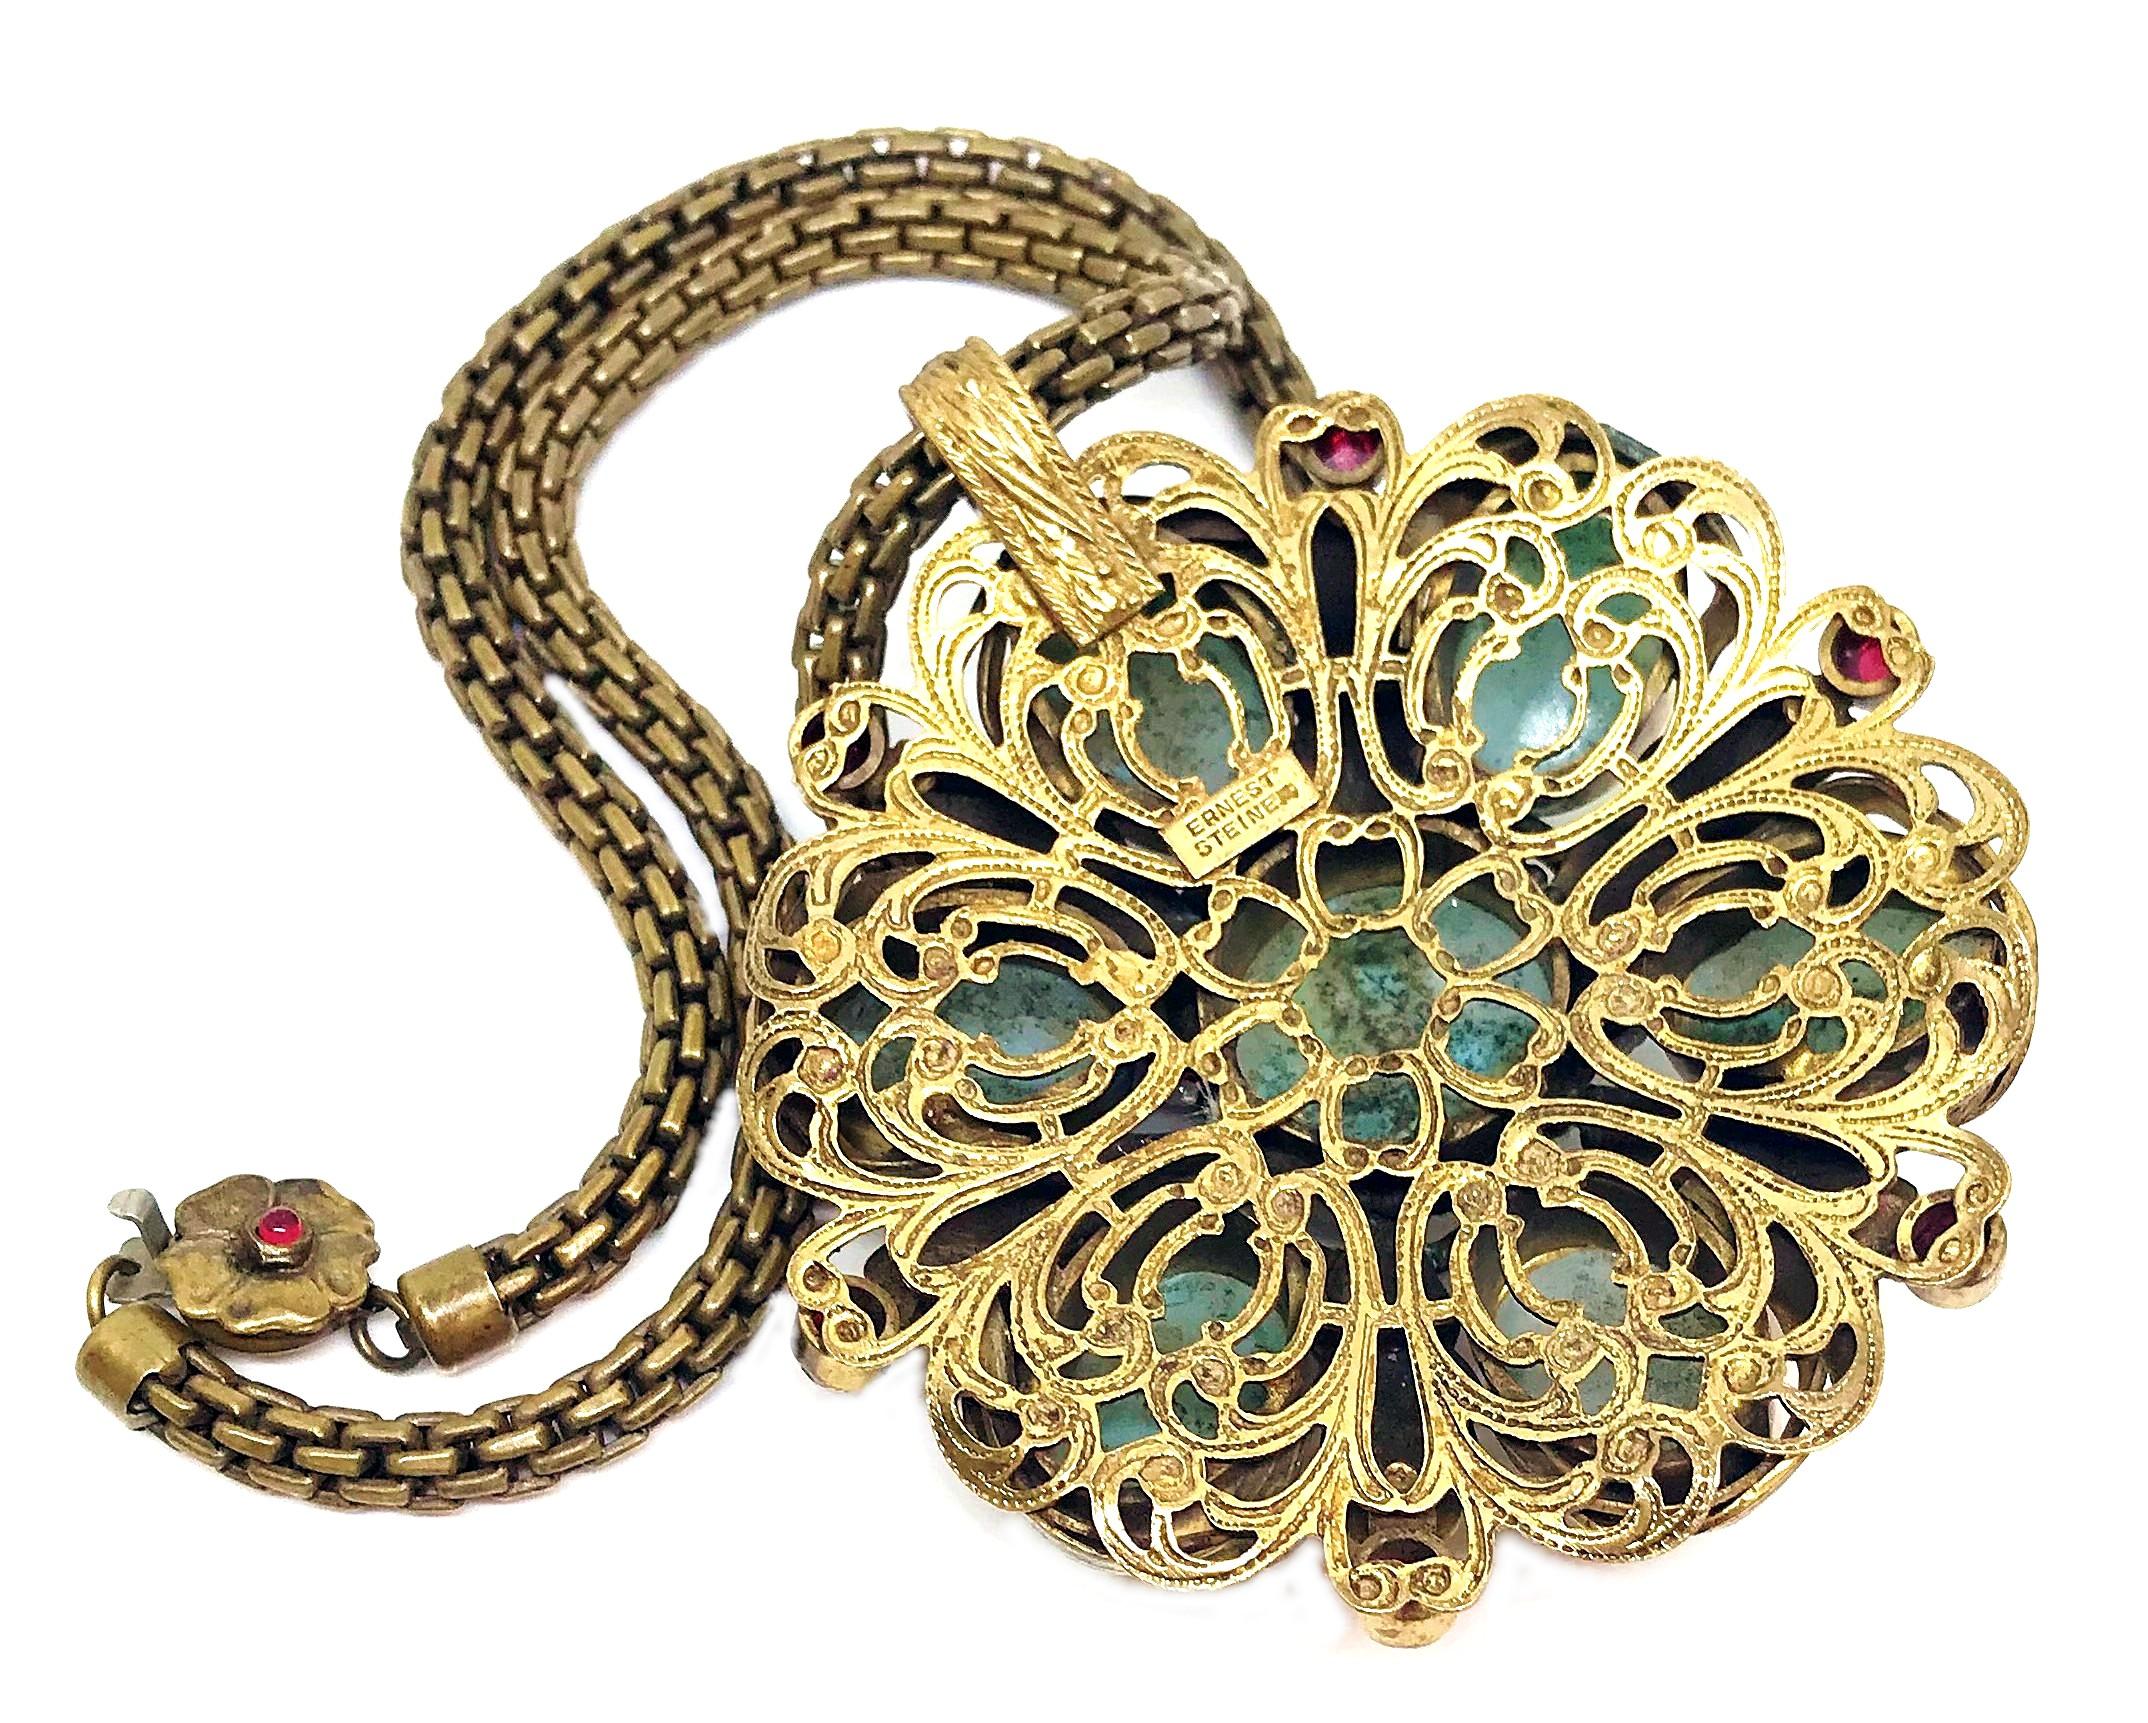 Circa 1940s Ernest Steiner Jeweled Pendant Necklace In Good Condition For Sale In Long Beach, CA